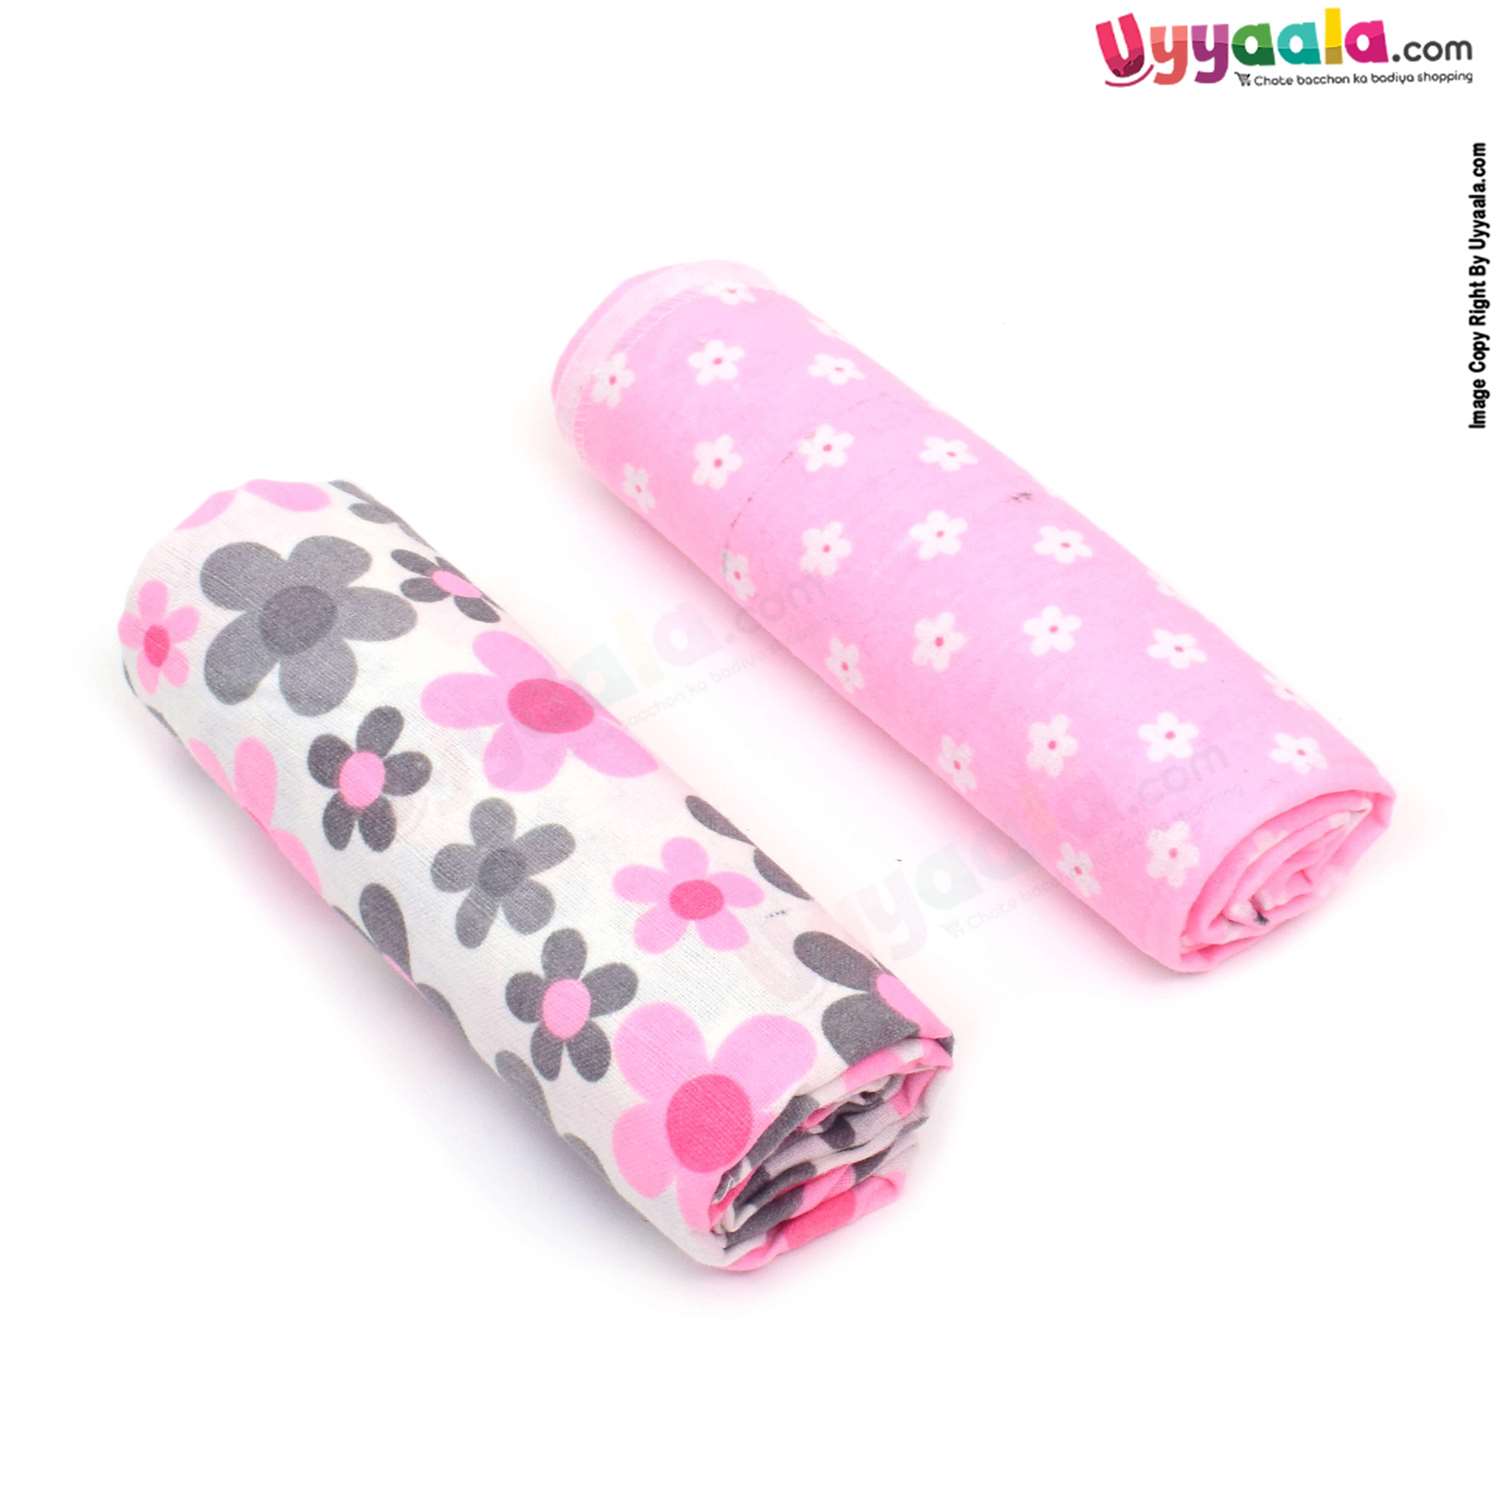 KOLACO Baby Soft Bath Cotton Towel with Floral Print Pack of 2 0+m Age, Size (74*73) - Light Pink & Multi Color